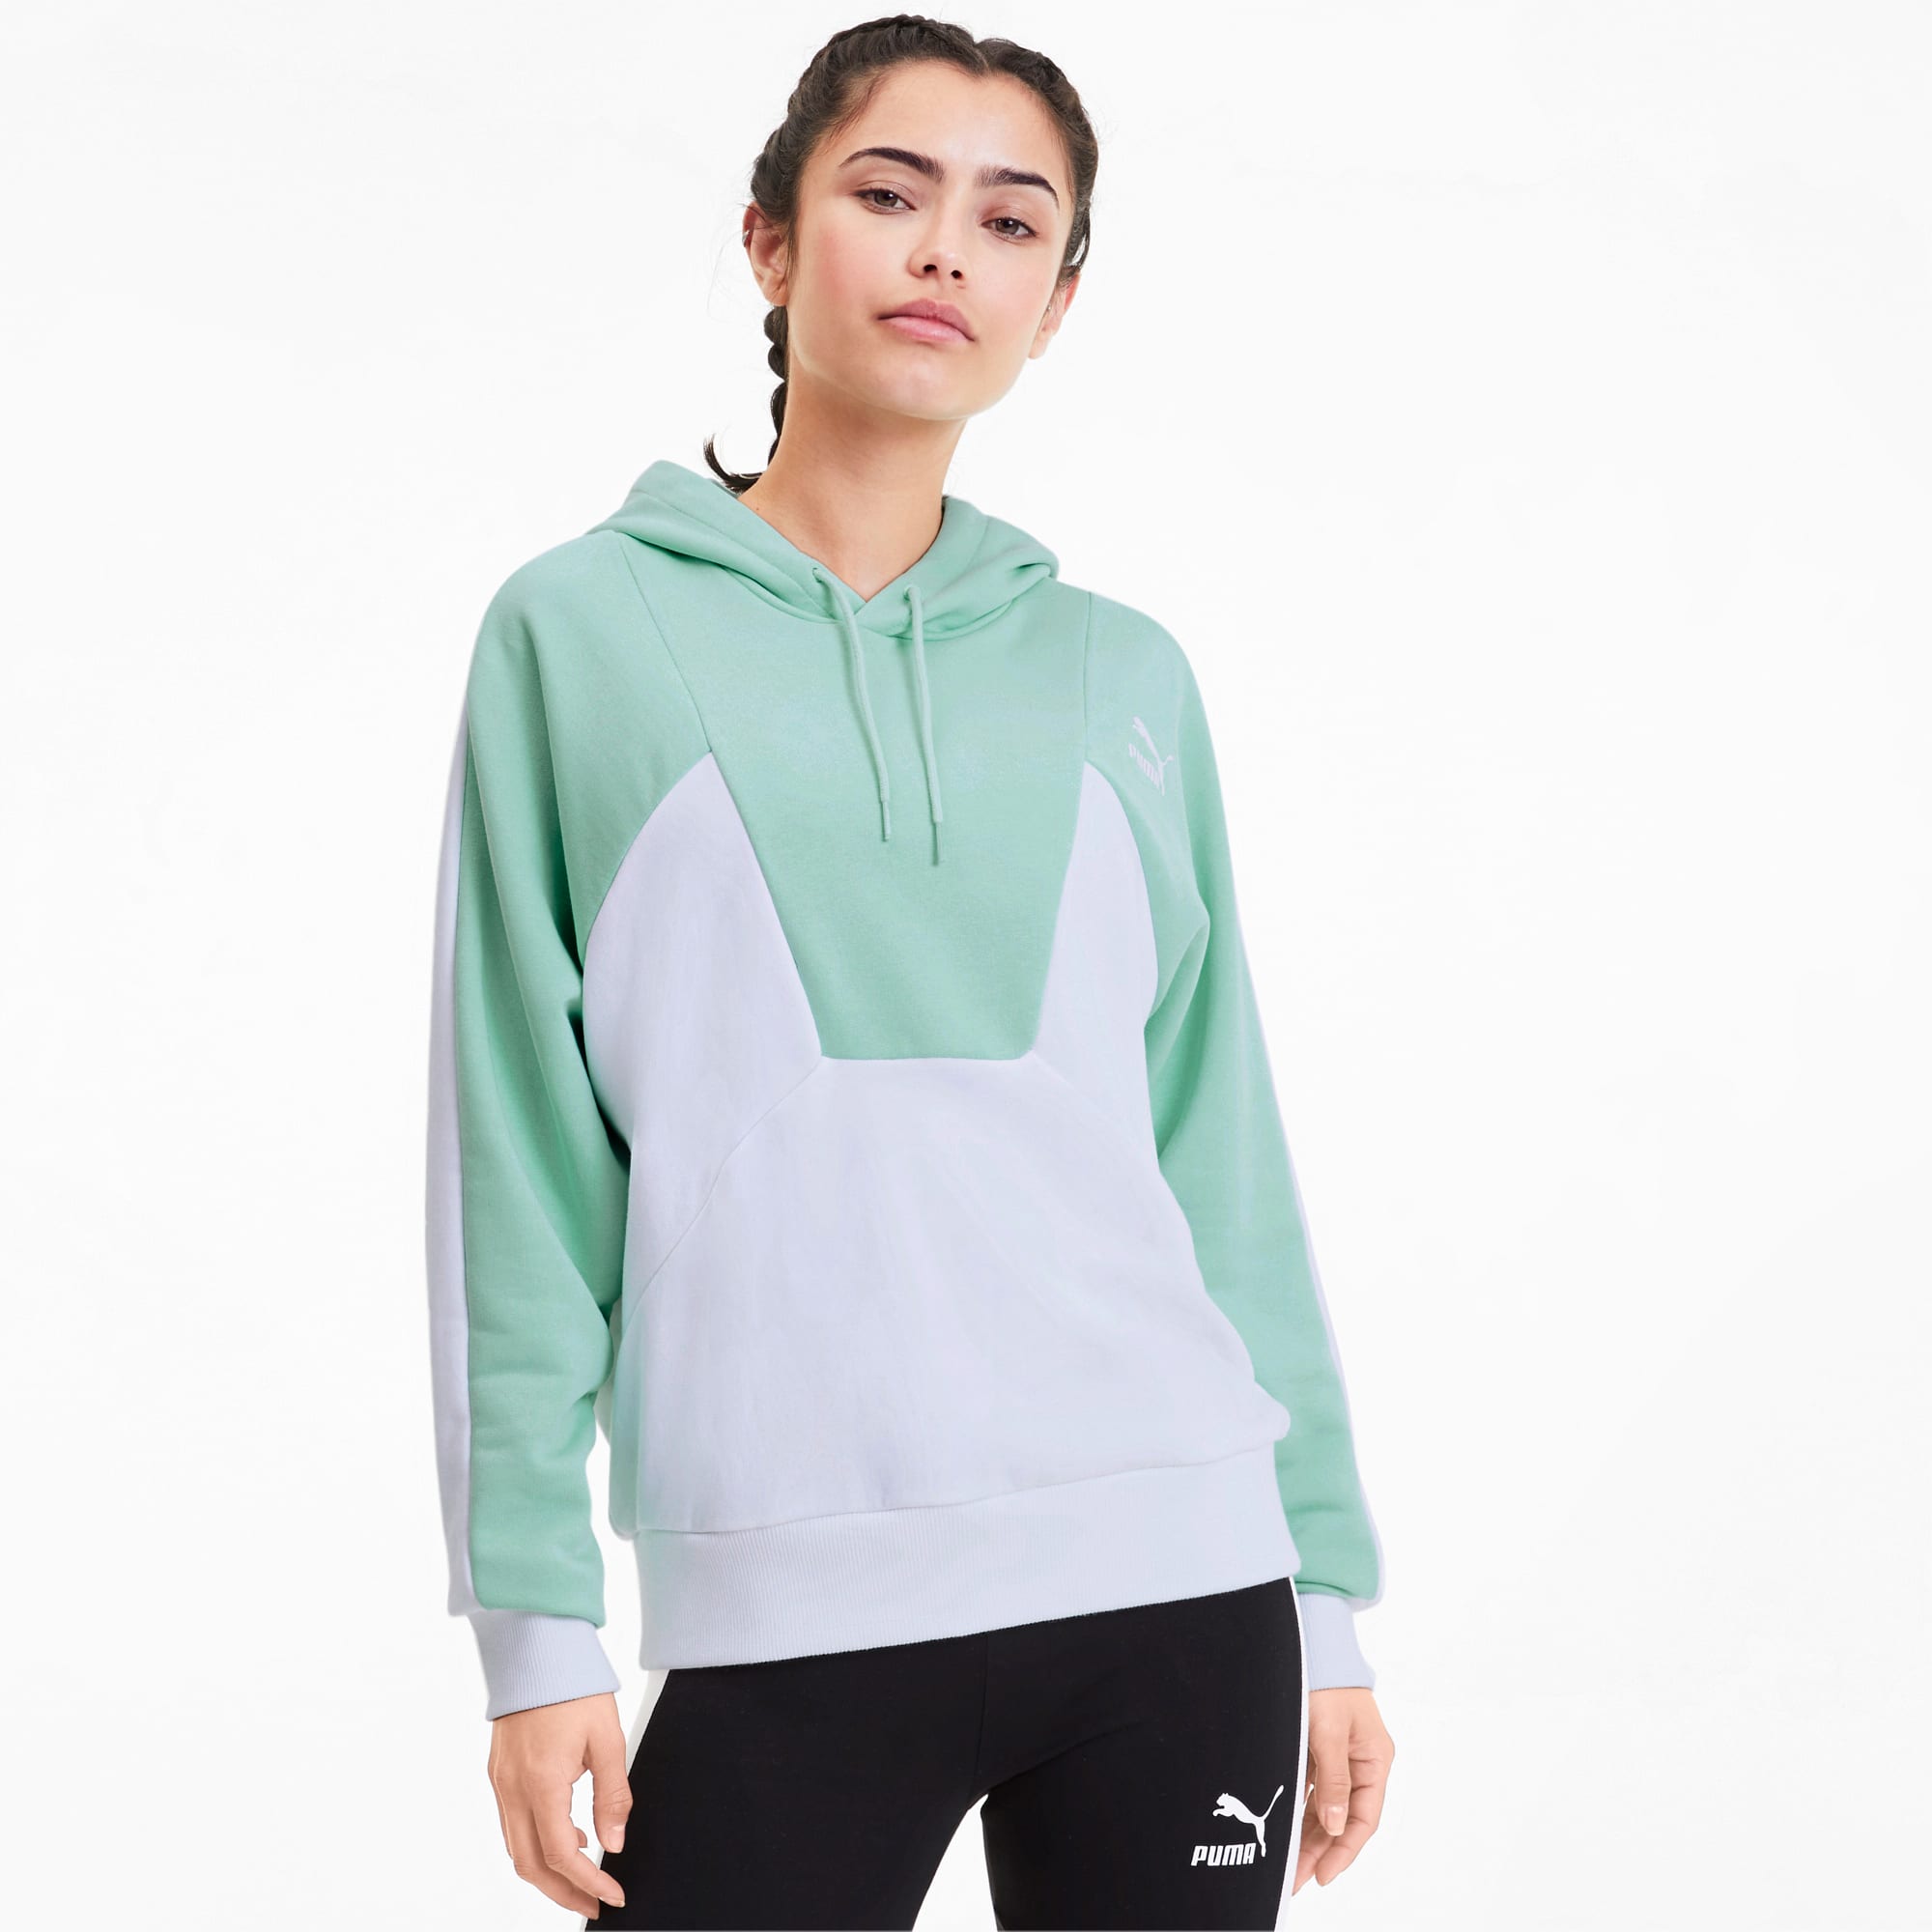 Tailored for Sport Women's Hoodie | PUMA US